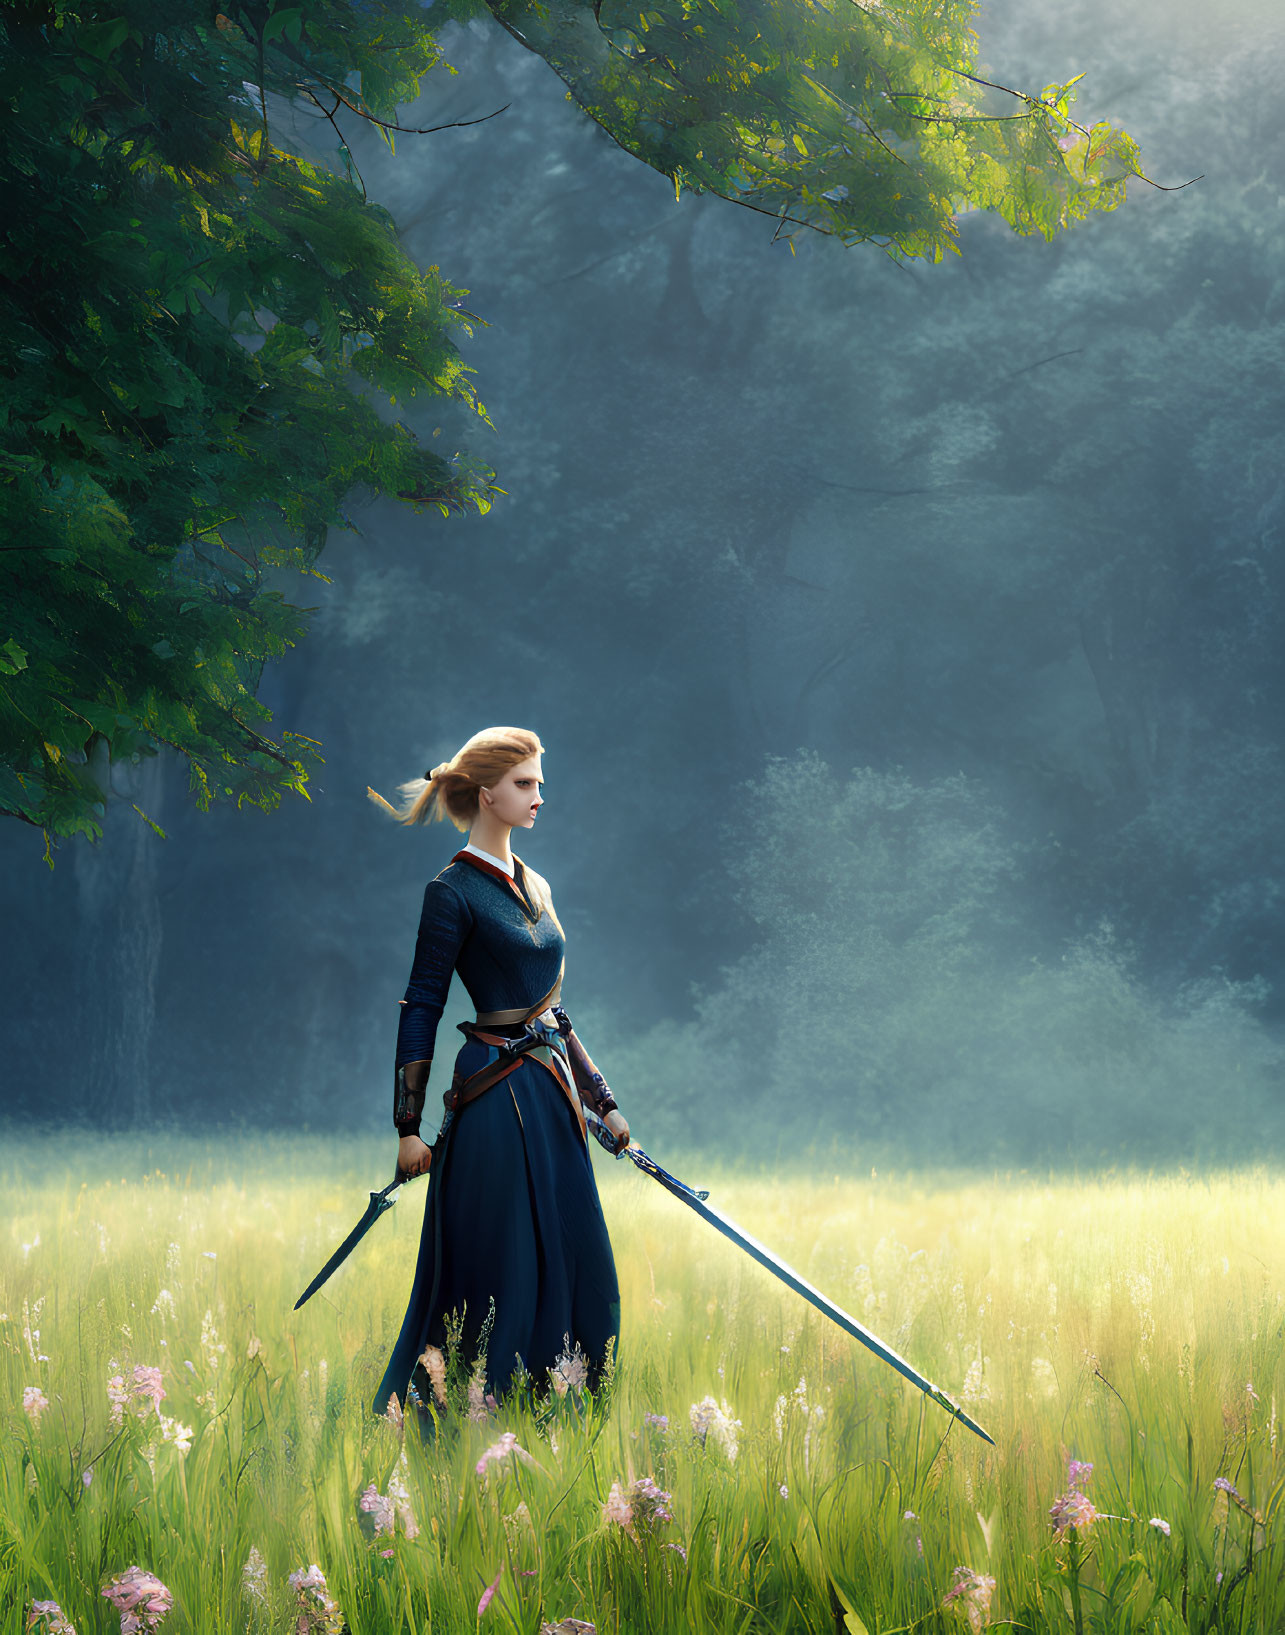 Medieval woman with sword in sunlit forest clearing